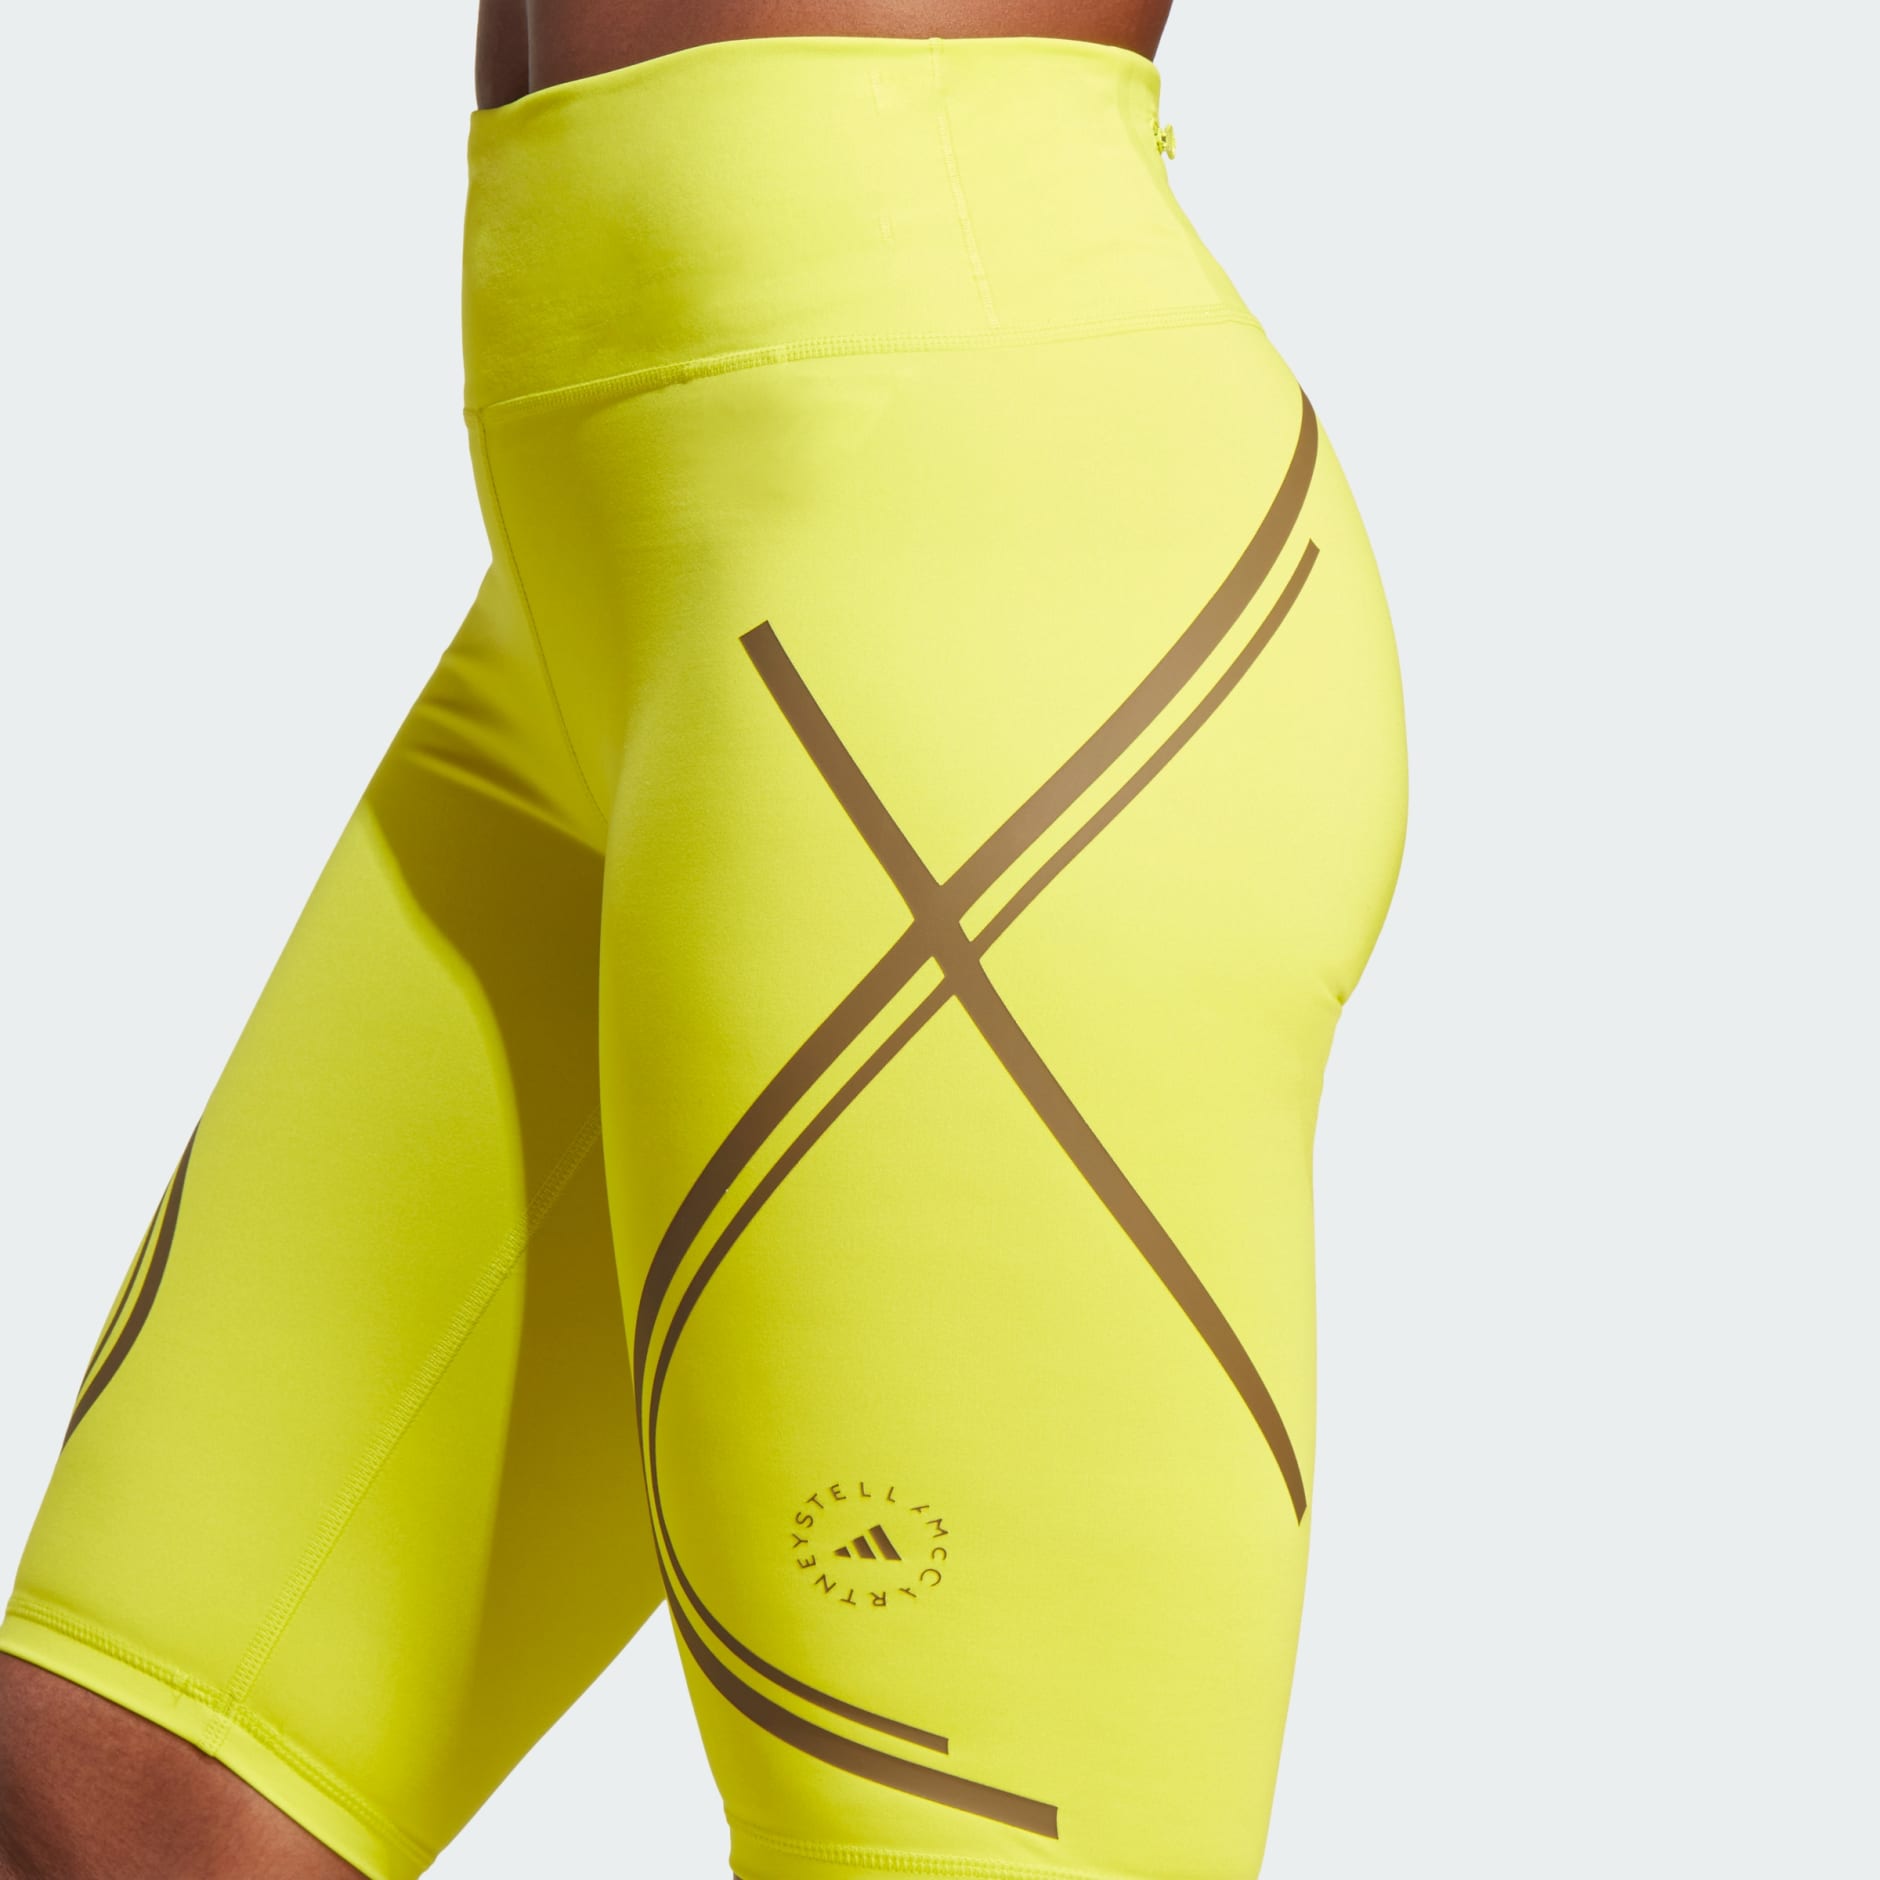 Adidas by Stella McCartney Leggings Sale, Up to 70% Off